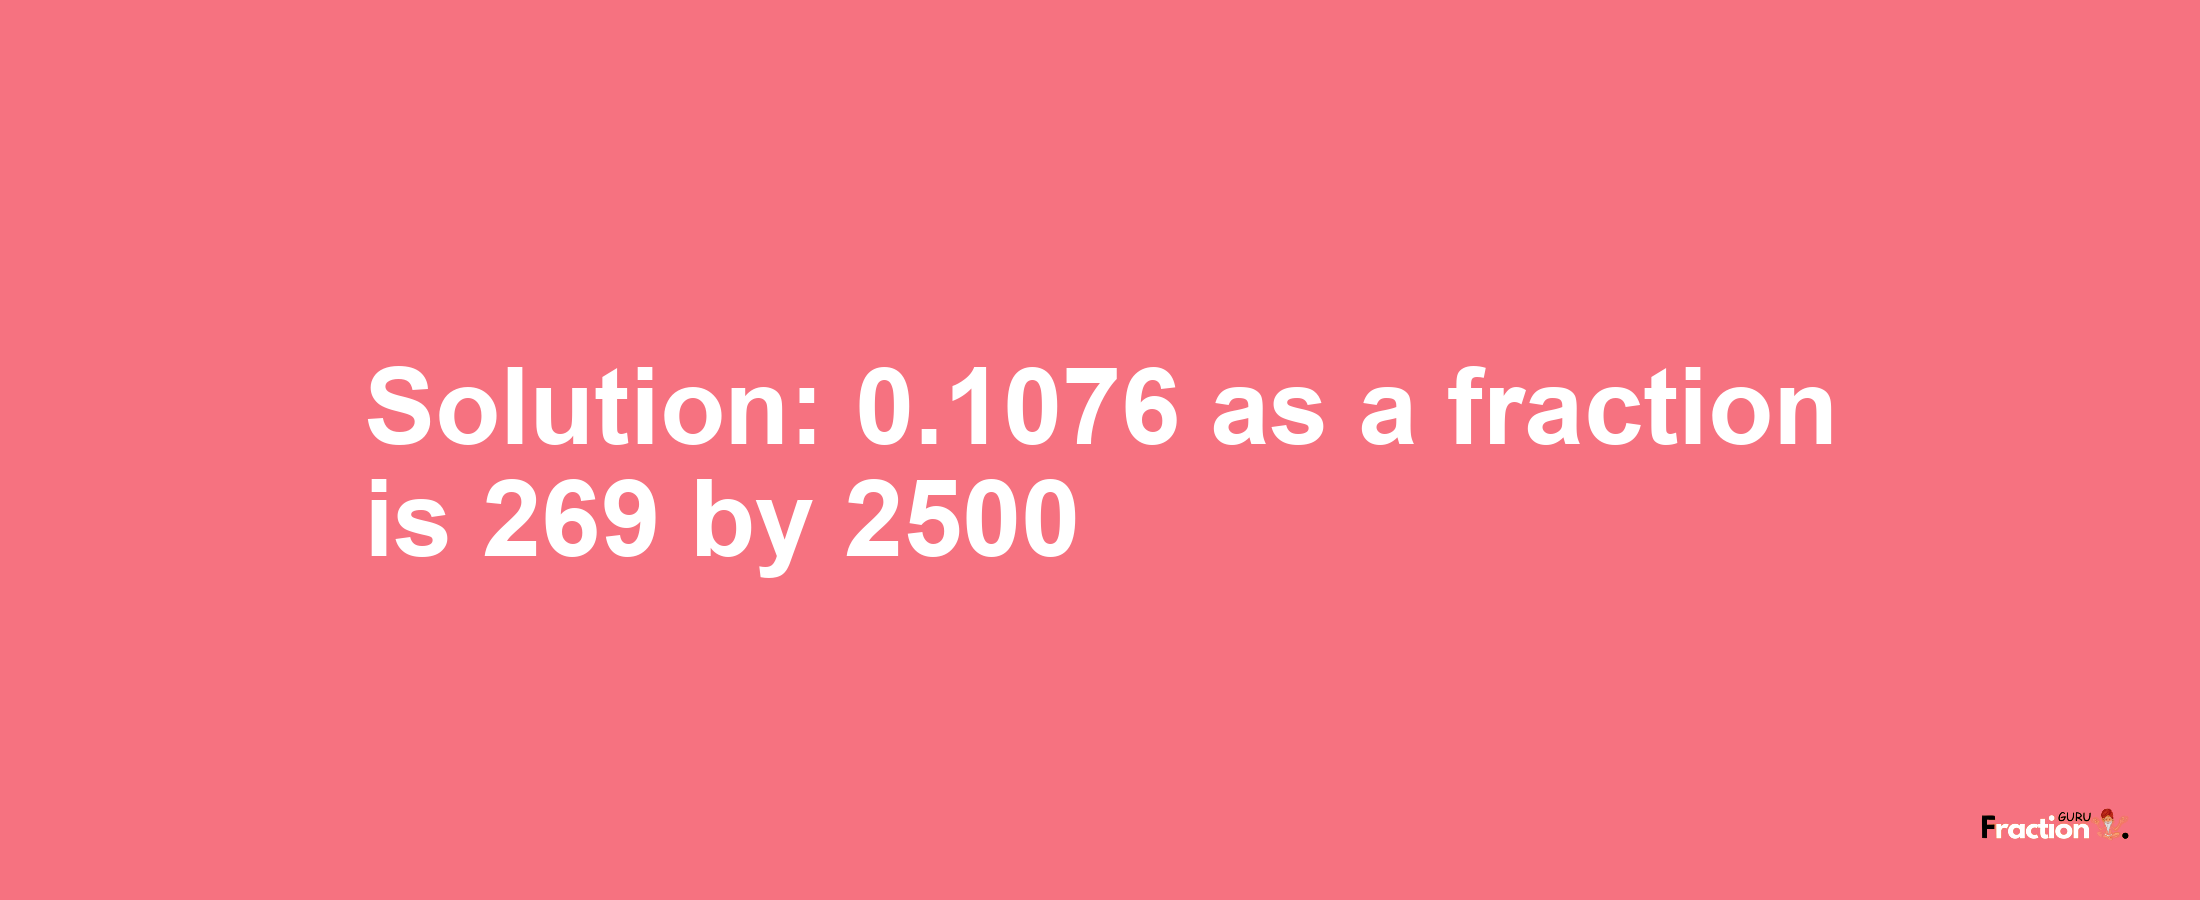 Solution:0.1076 as a fraction is 269/2500